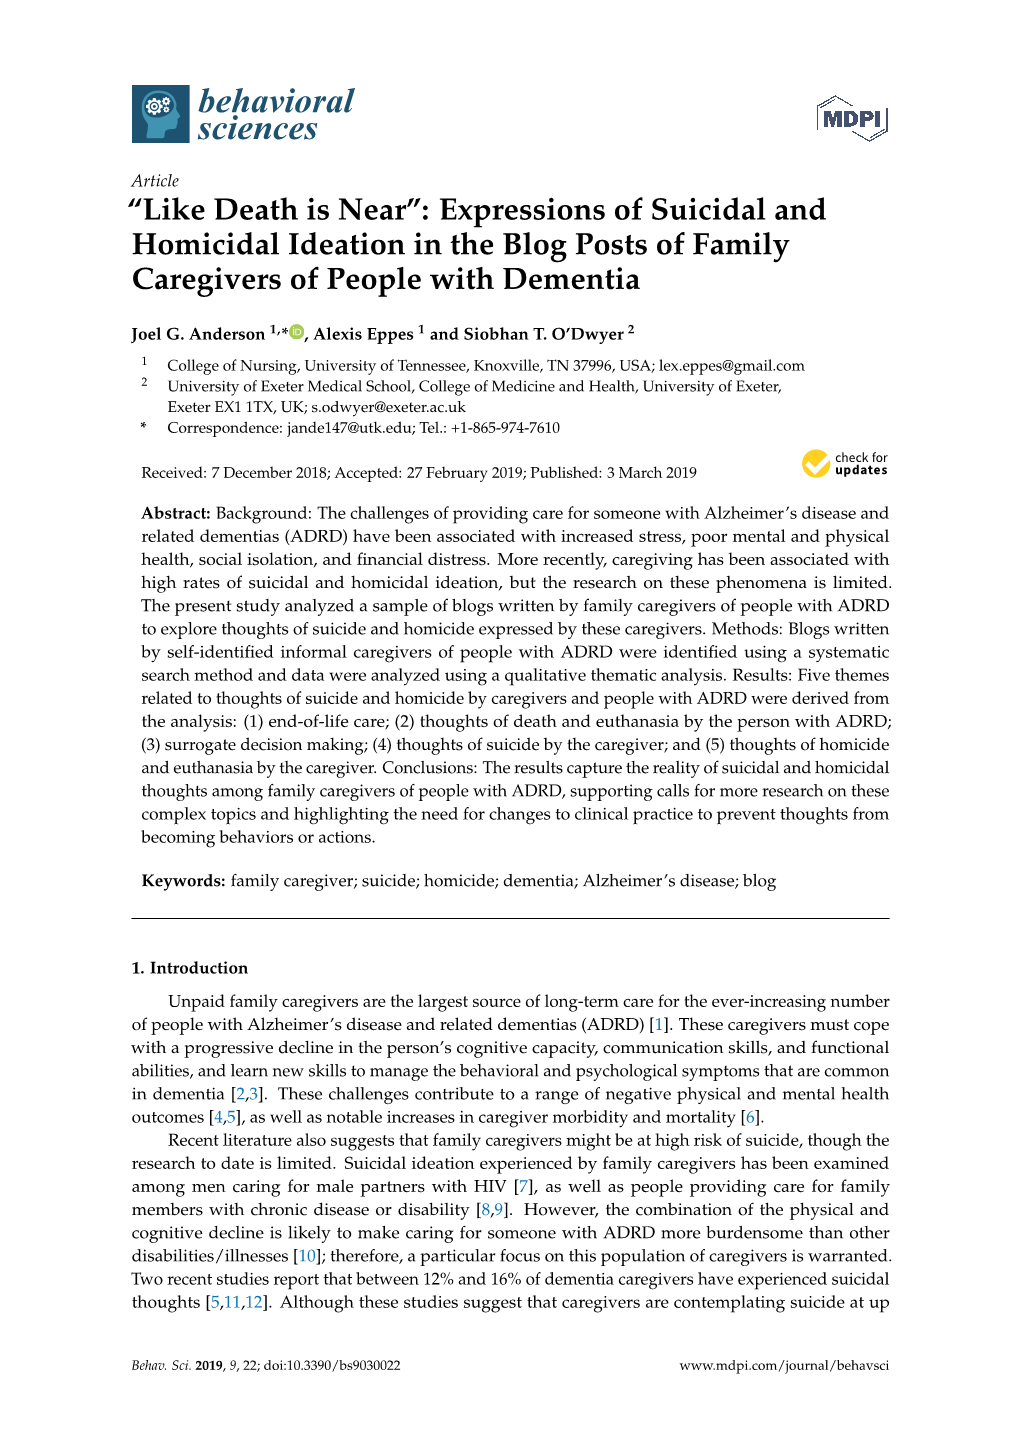 “Like Death Is Near”: Expressions of Suicidal and Homicidal Ideation in the Blog Posts of Family Caregivers of People with Dementia